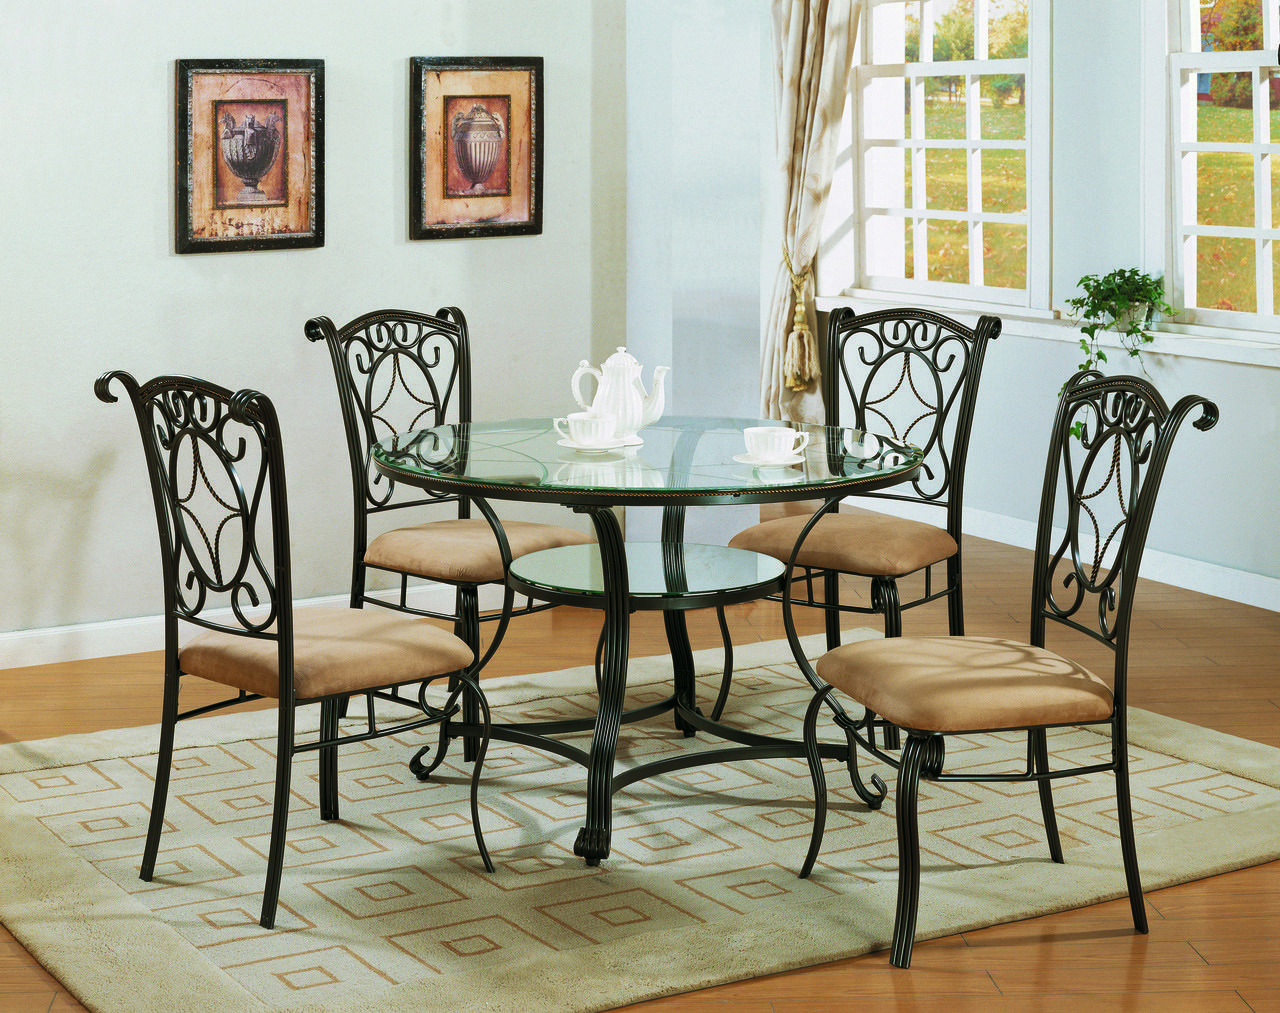 The jessica dining set is elegantly designed with an etched